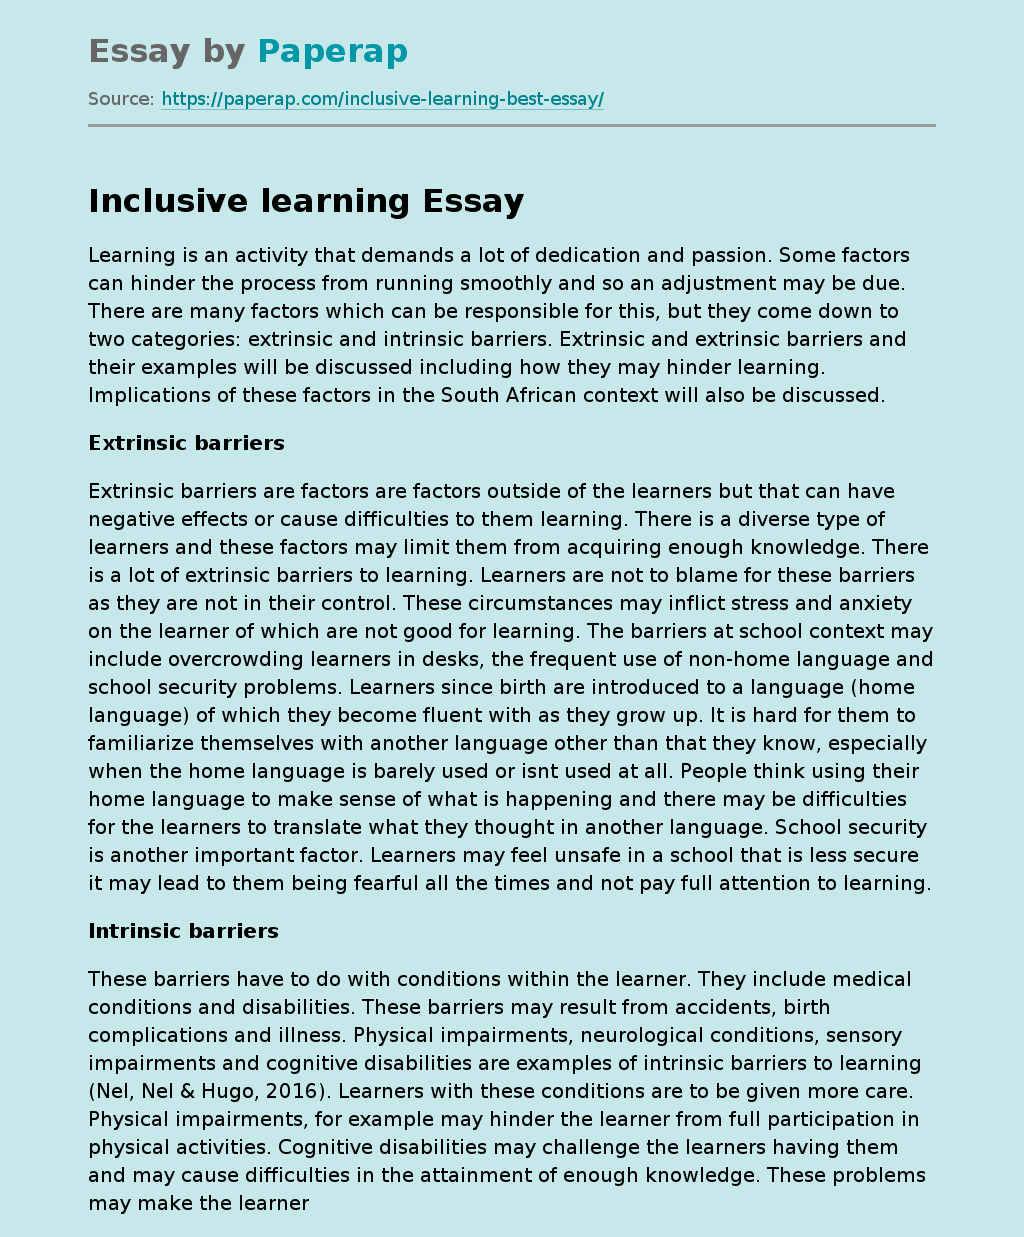 Inclusive learning